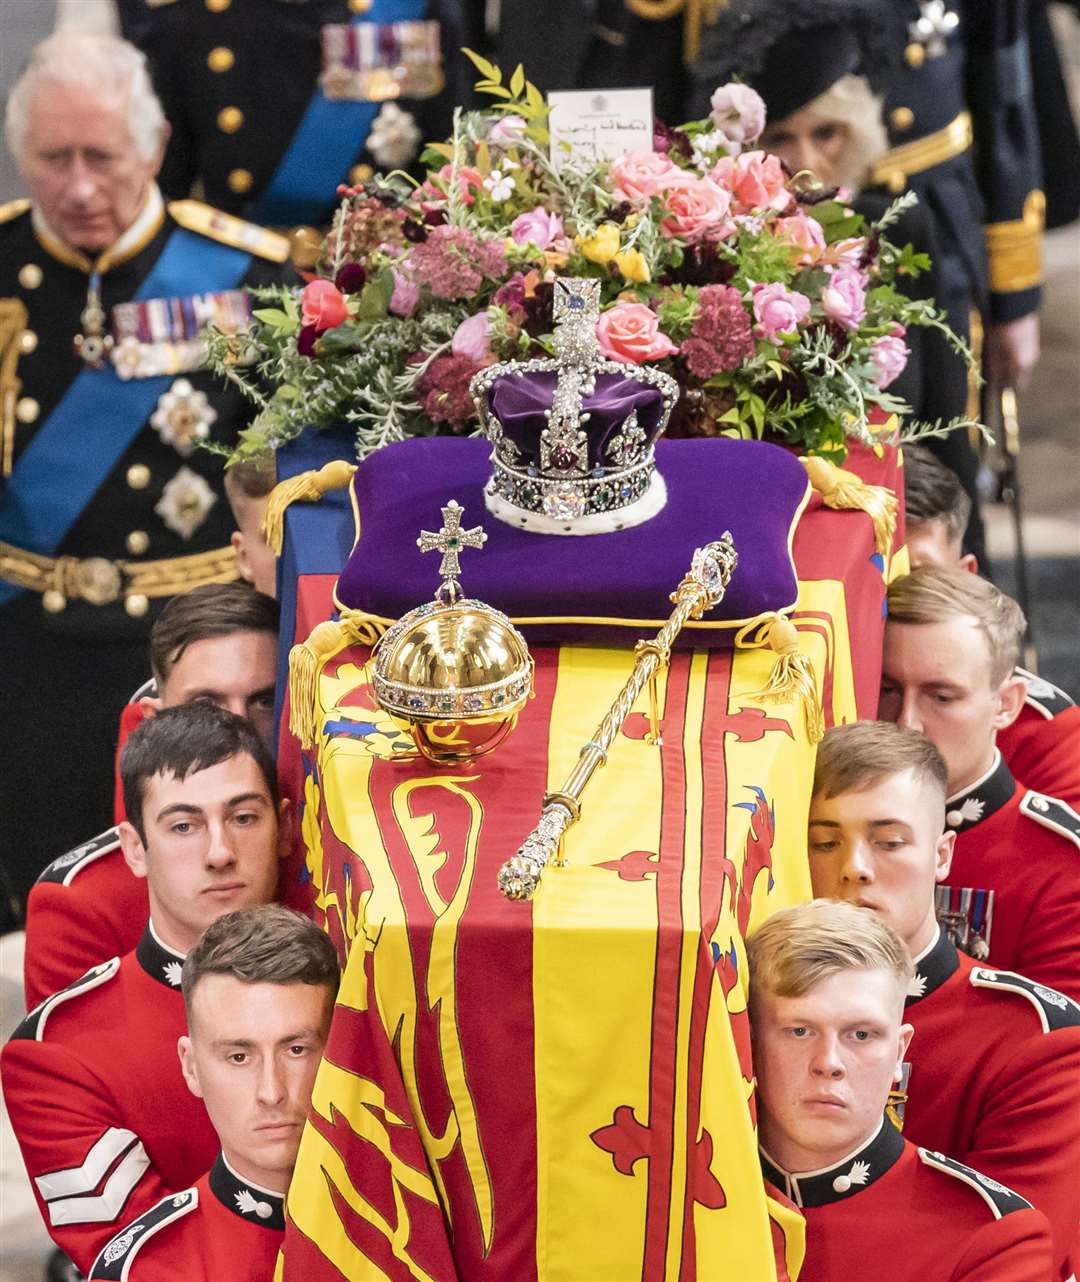 Charles and members of the royal family following behind the coffin of Queen Elizabeth II, as it is carried out of Westminster Abbey (Danny Lawson/PA)